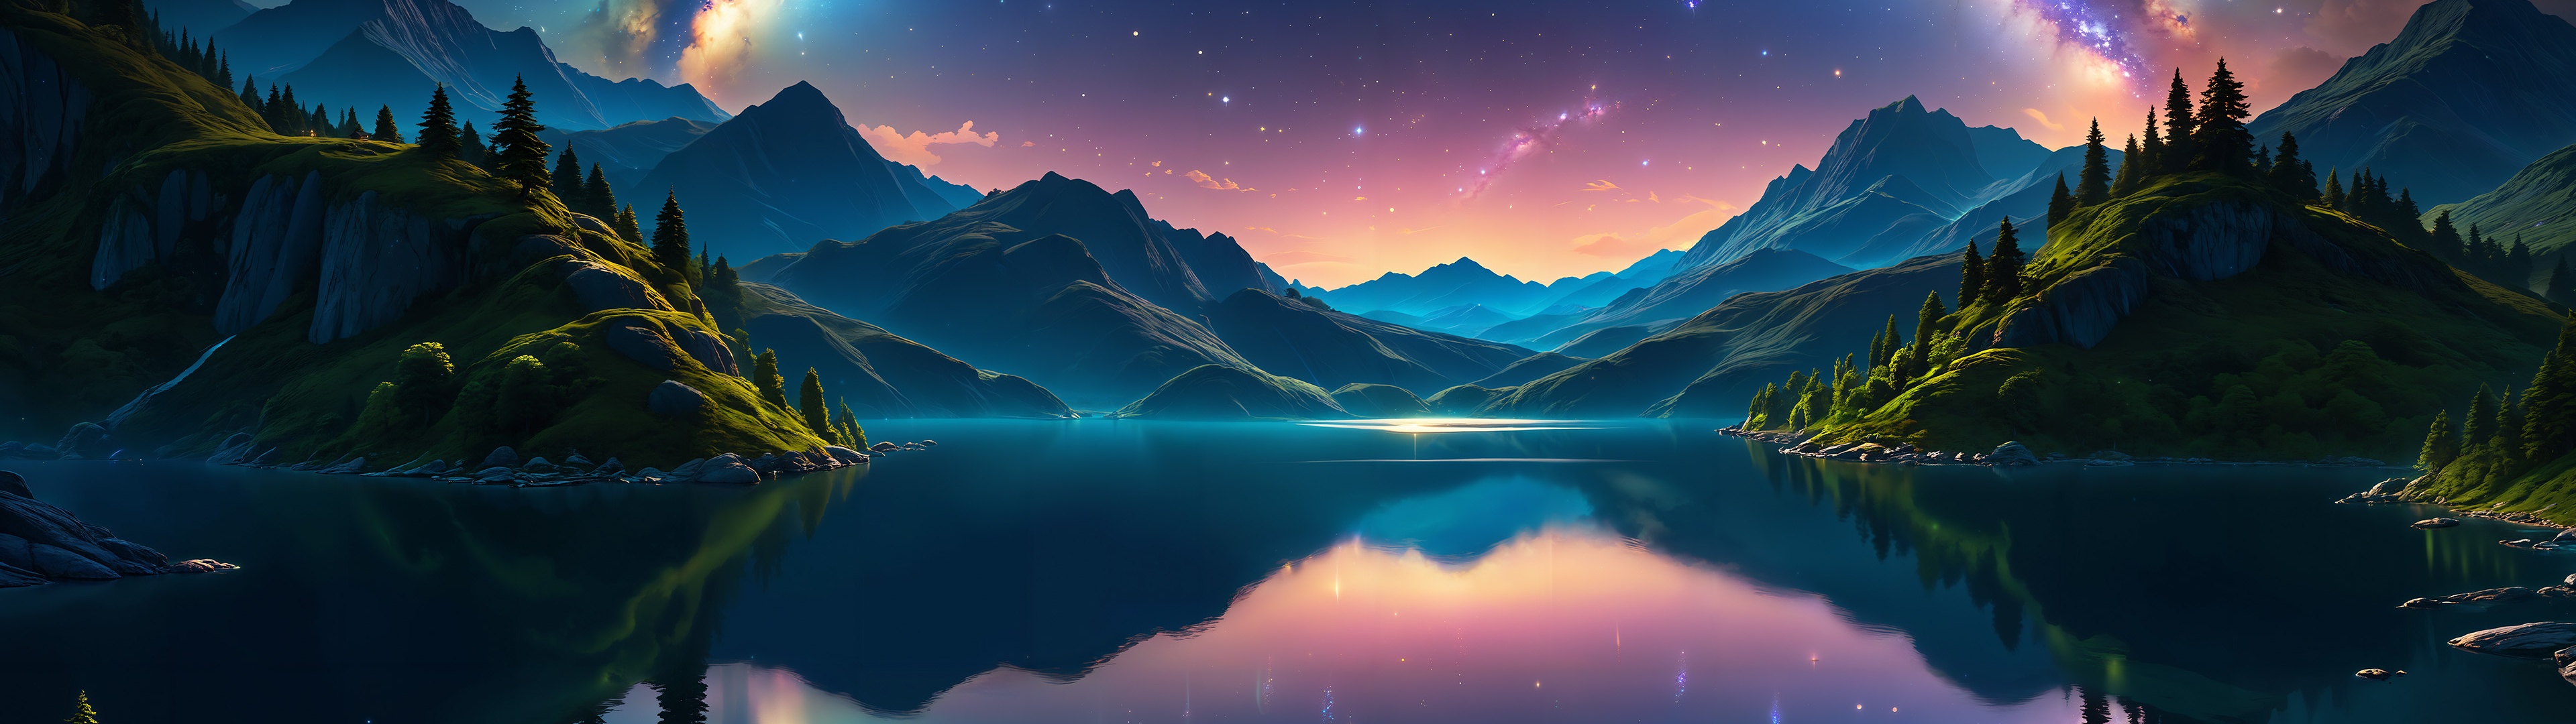 Dual Monitor HD Wallpapers | 3840x1080 Wallpapers - Page 6